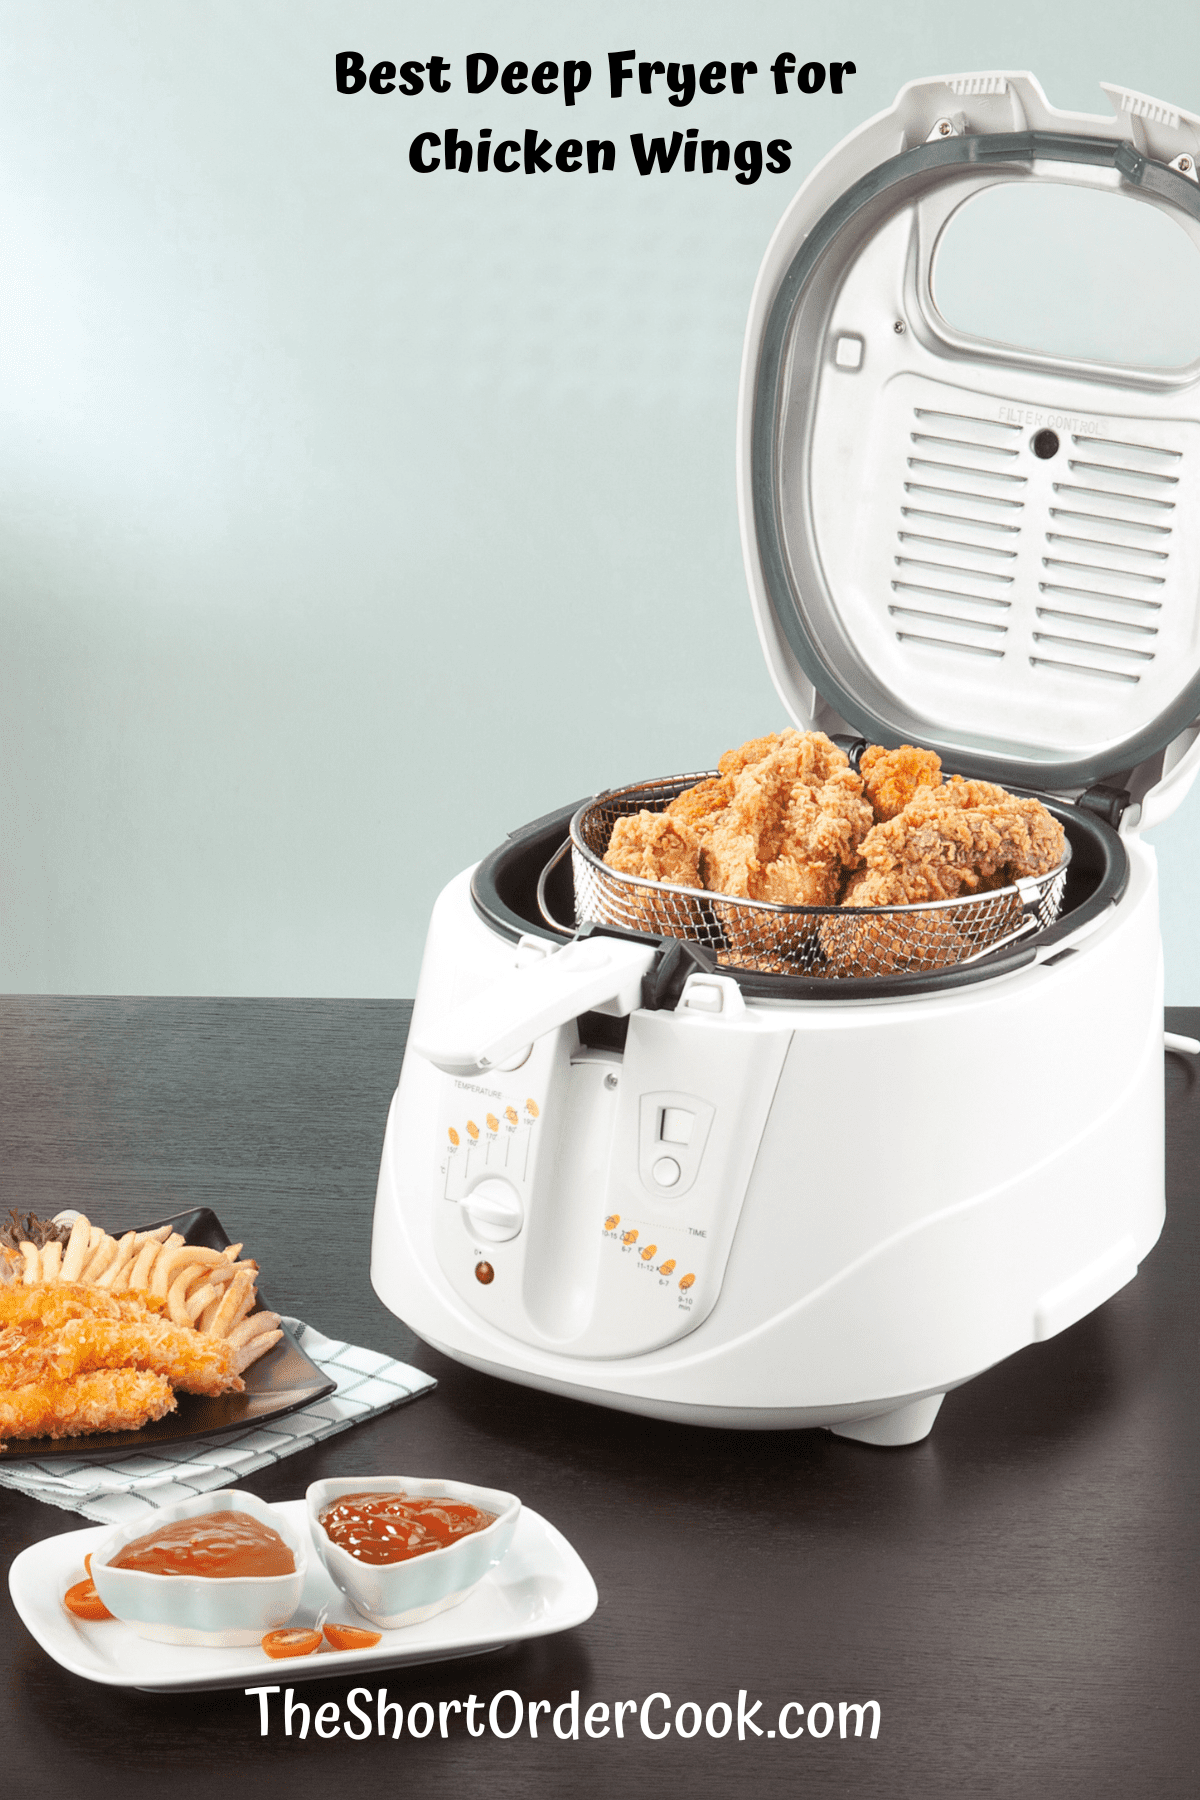 Deep fryer with lid open and fried chicken inside.